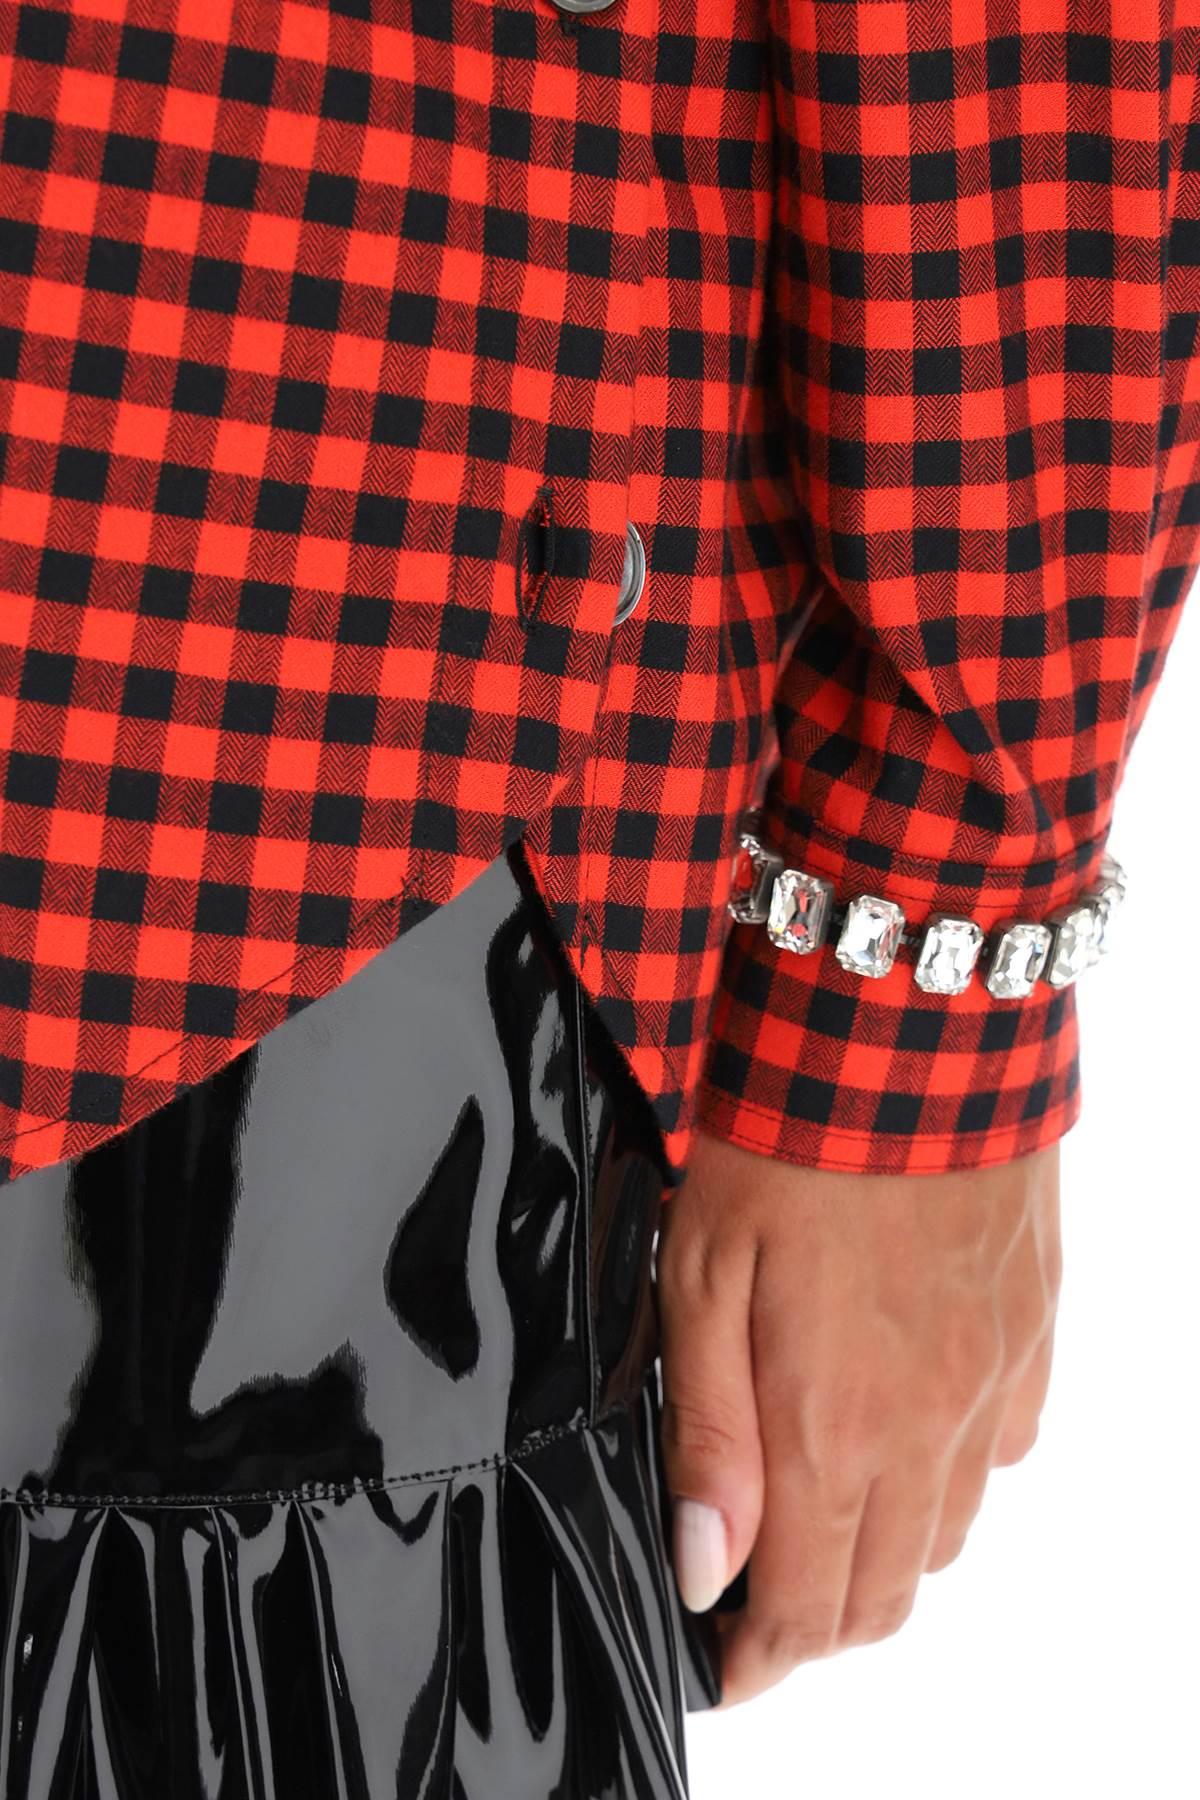 N°21 N.21 Oversized Gingham Shirt With Crystals in Red,Black Red Womens Tops N°21 Tops 